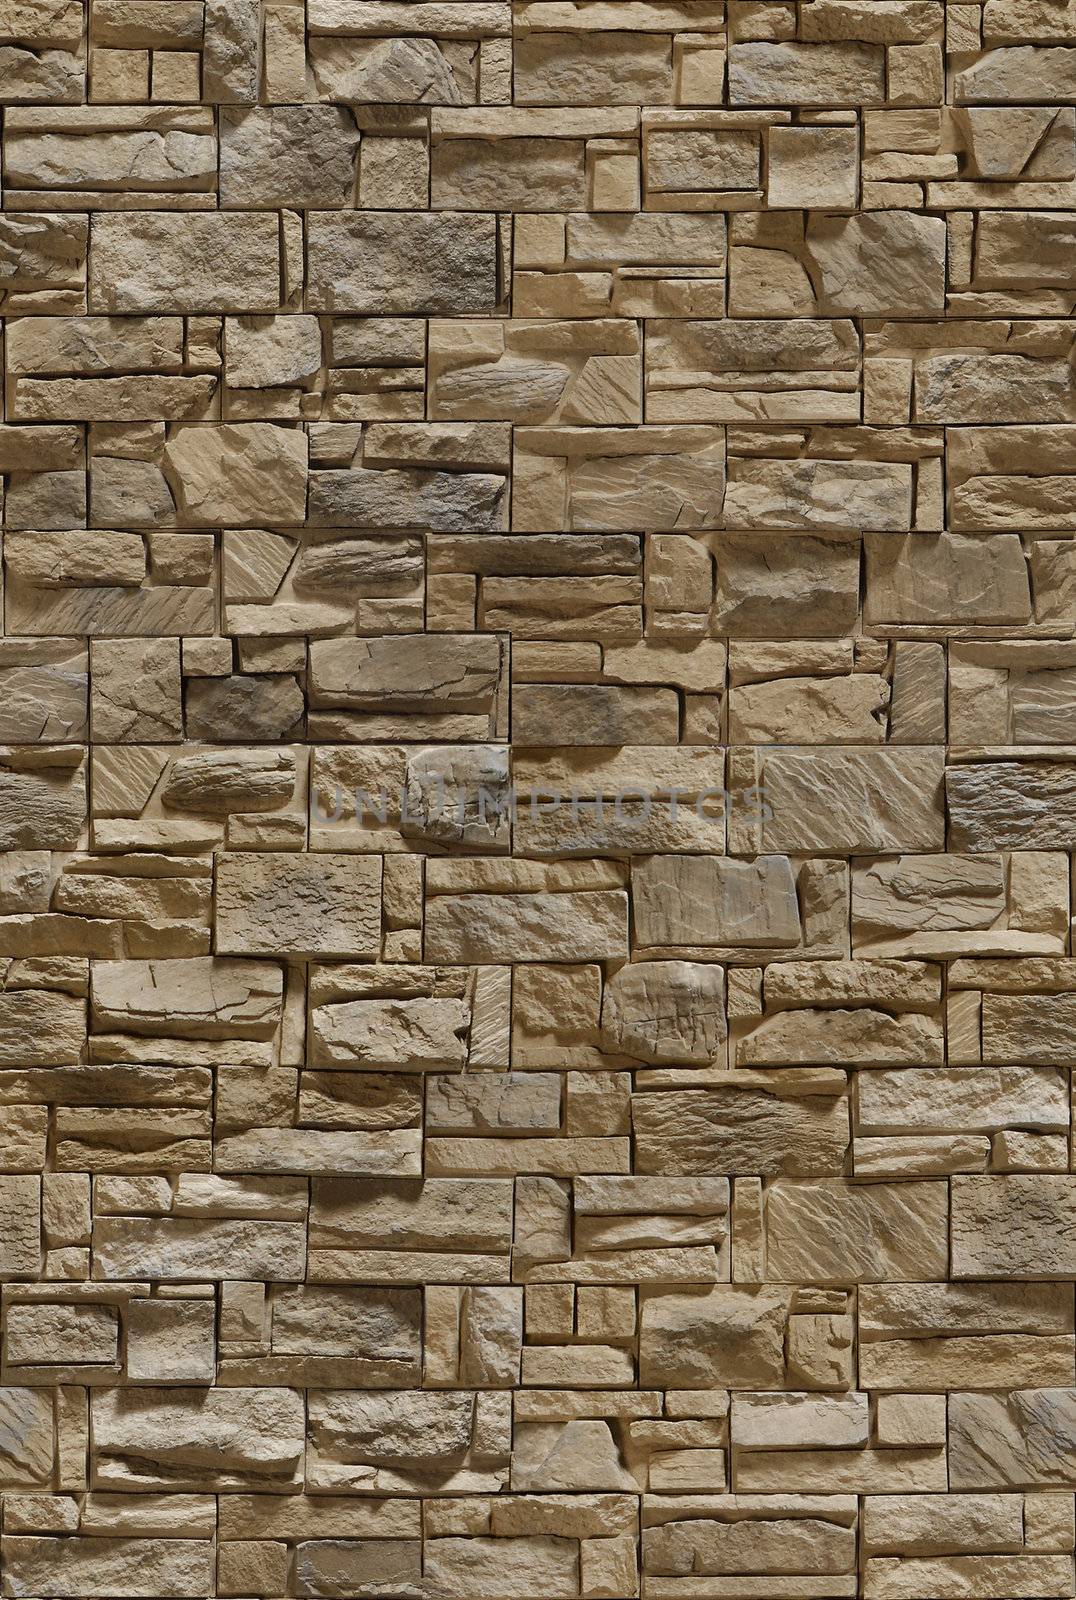 Structure of a stone wall by Baltus